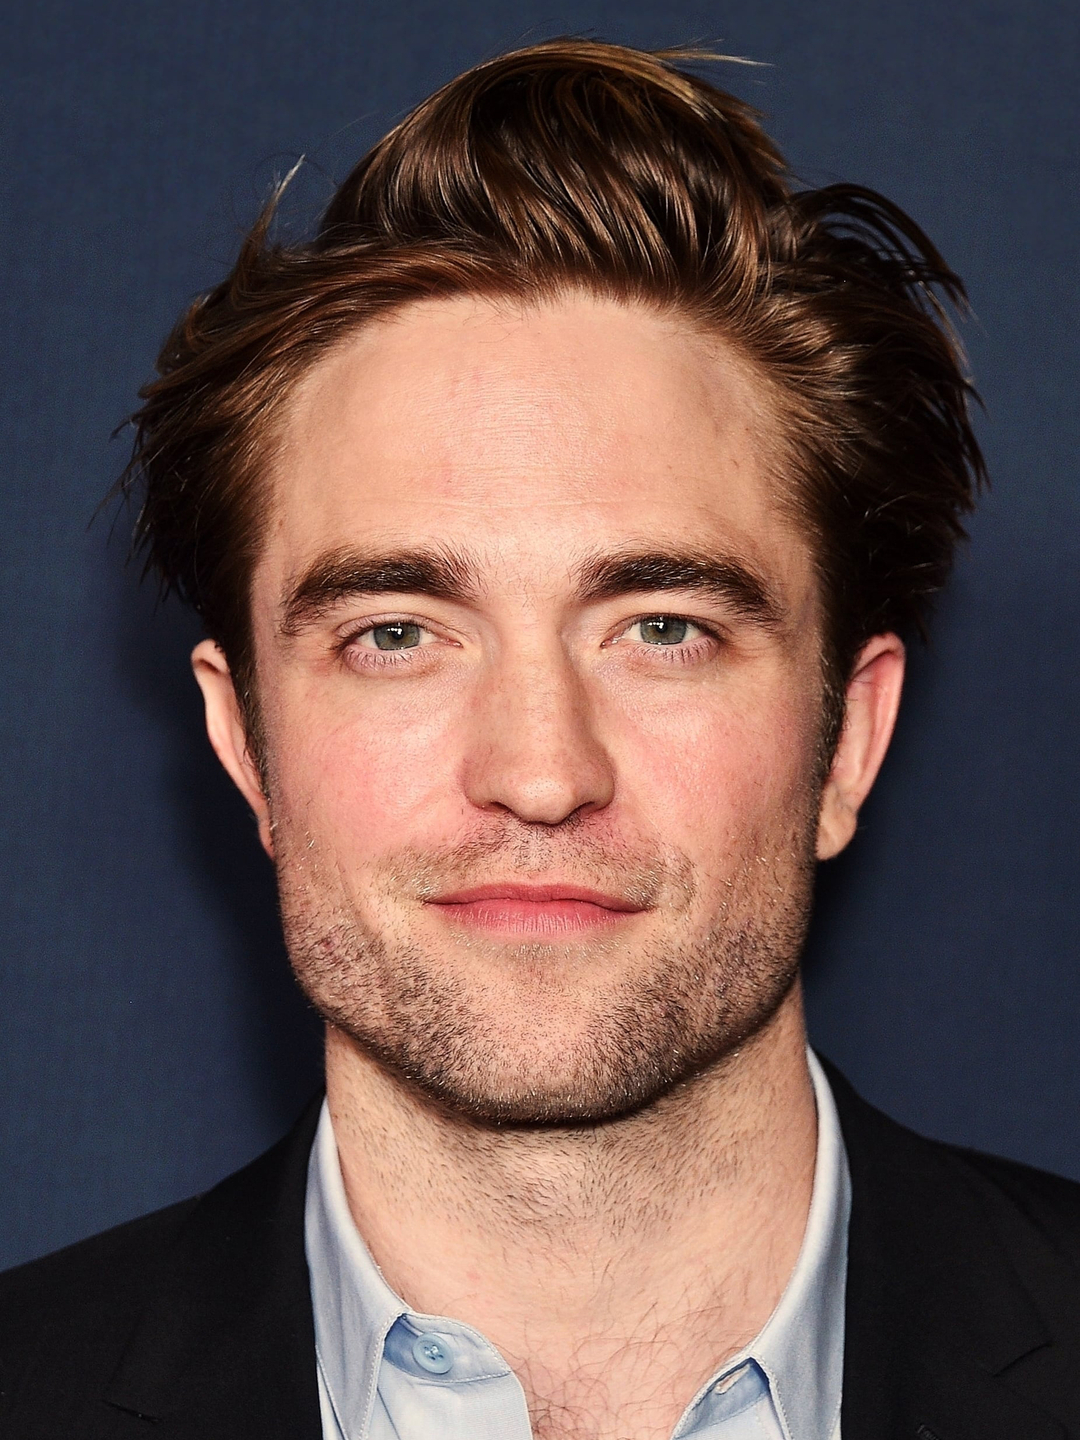 Robert Pattinson who is his mother